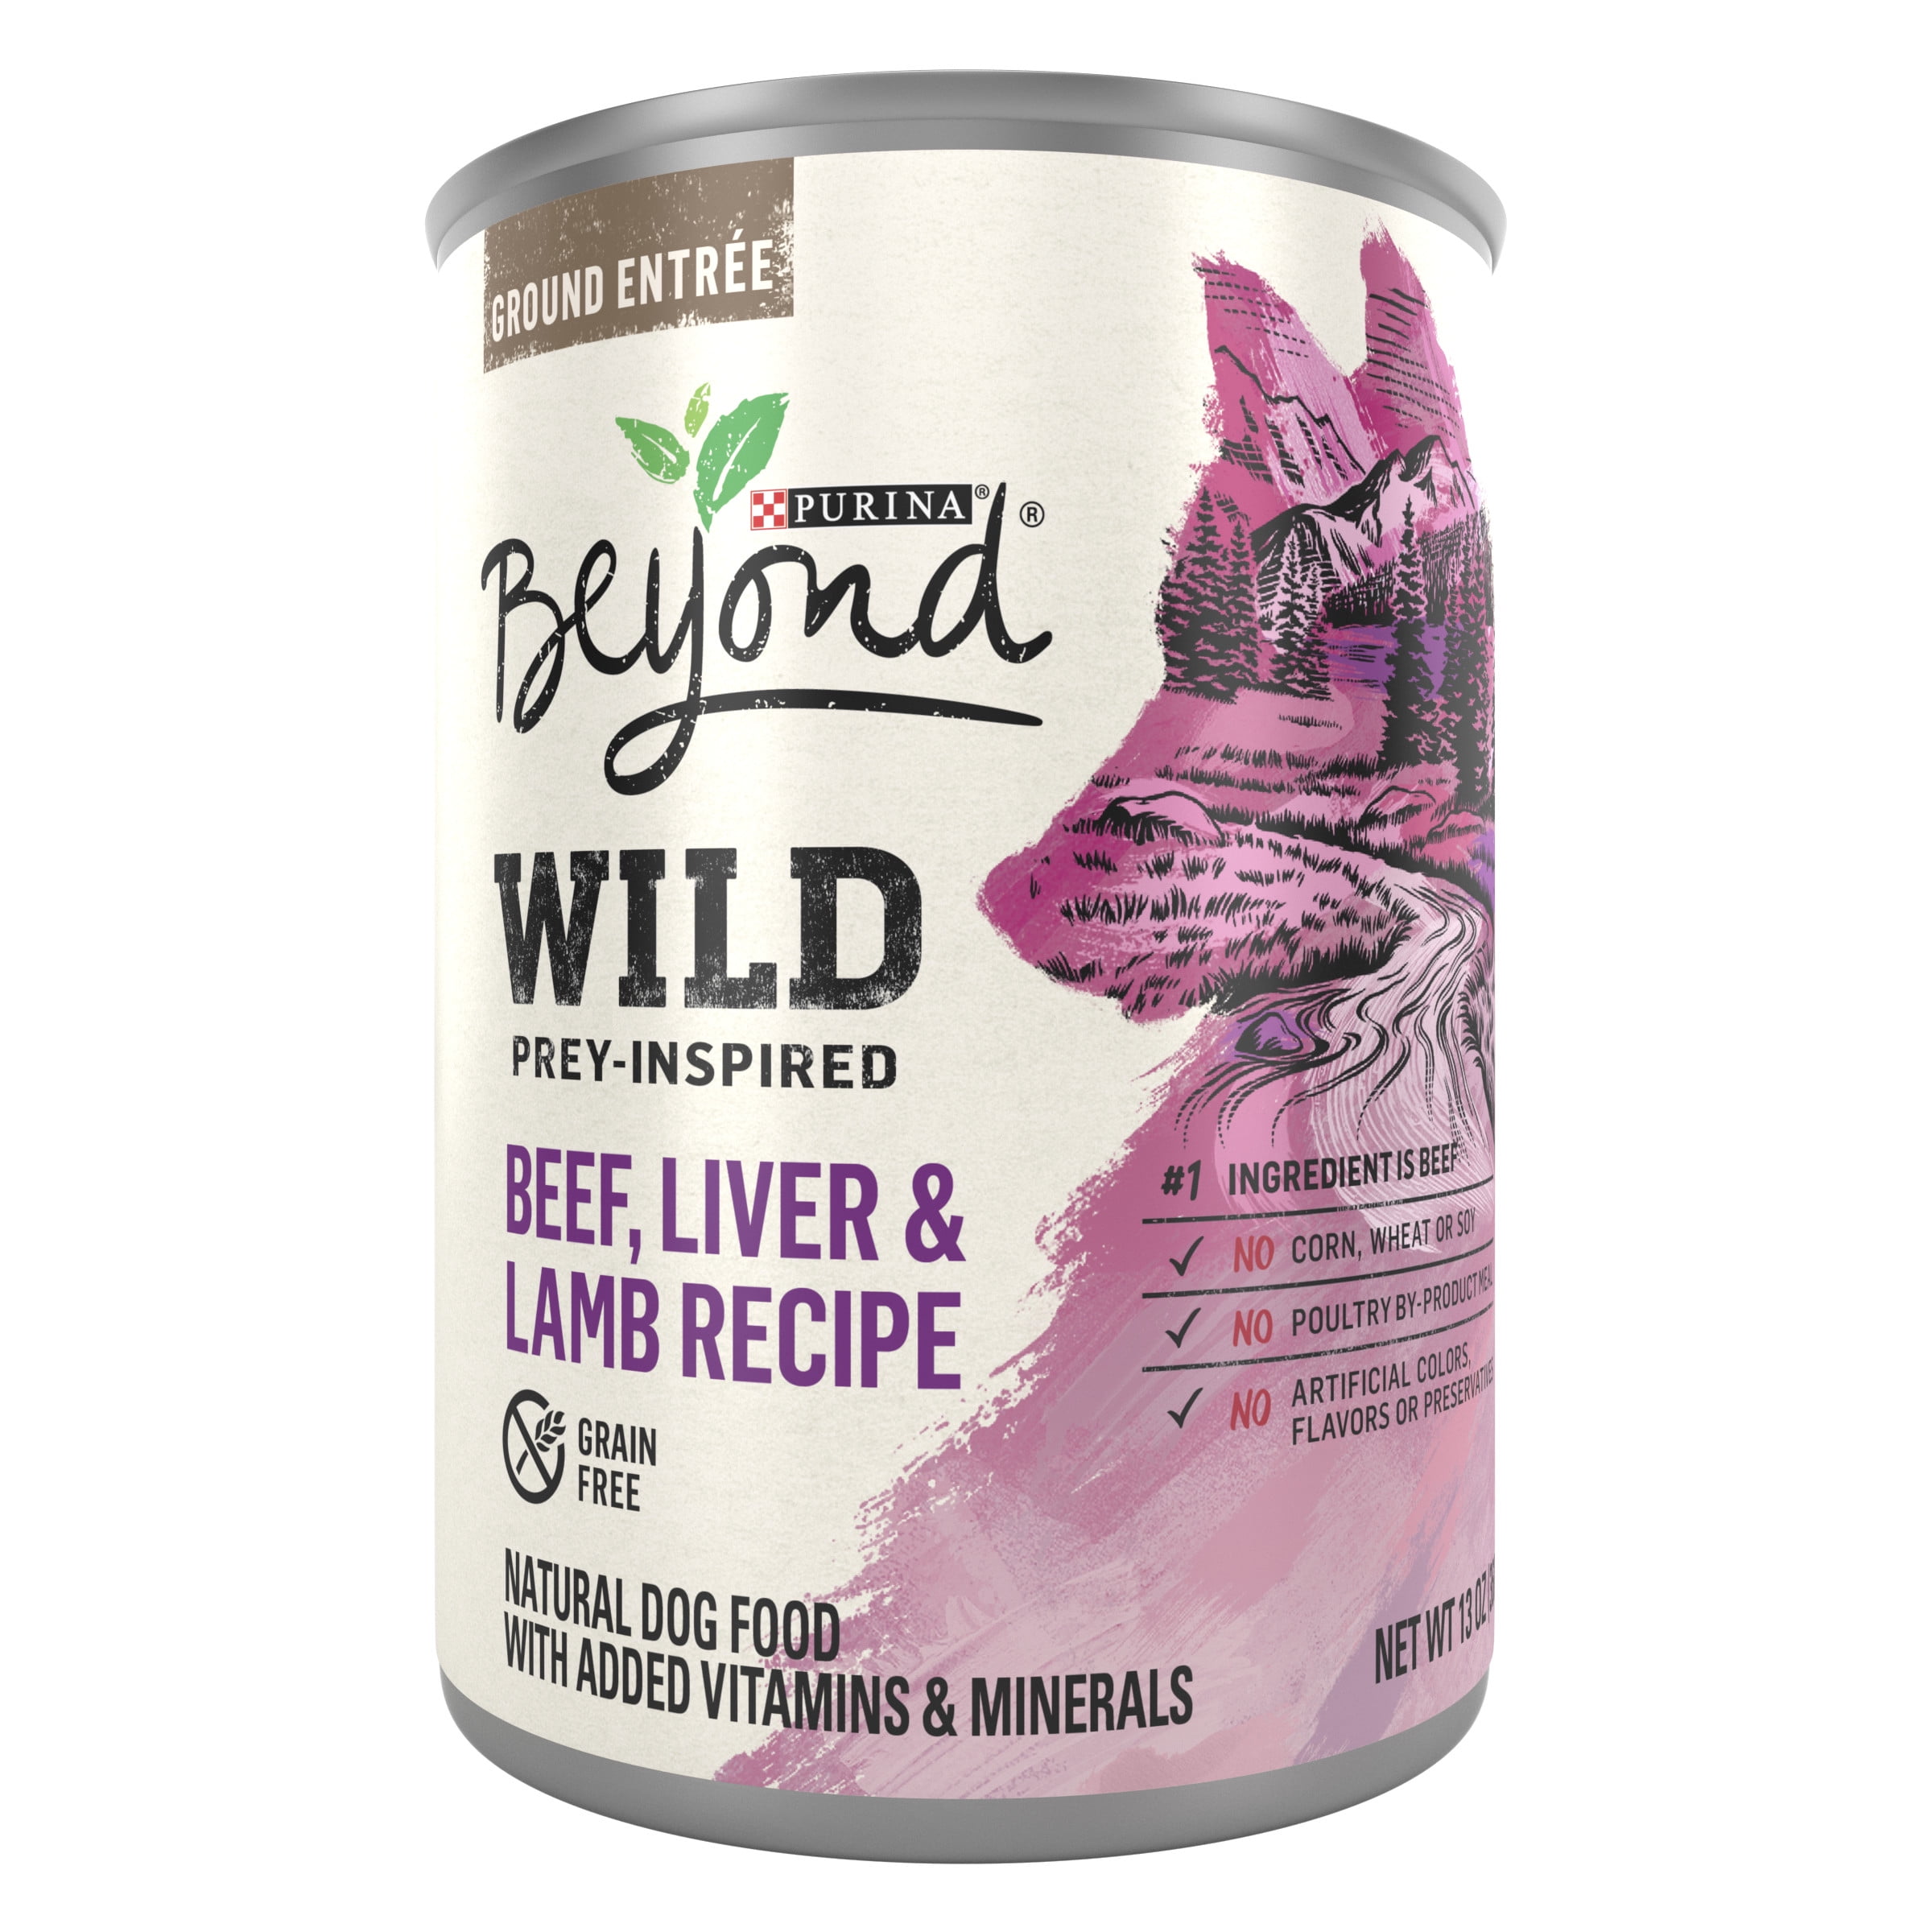 Purina Beyond Wild Prey Inspired Wet Dog Food, Grain-Free, 13 oz Cans